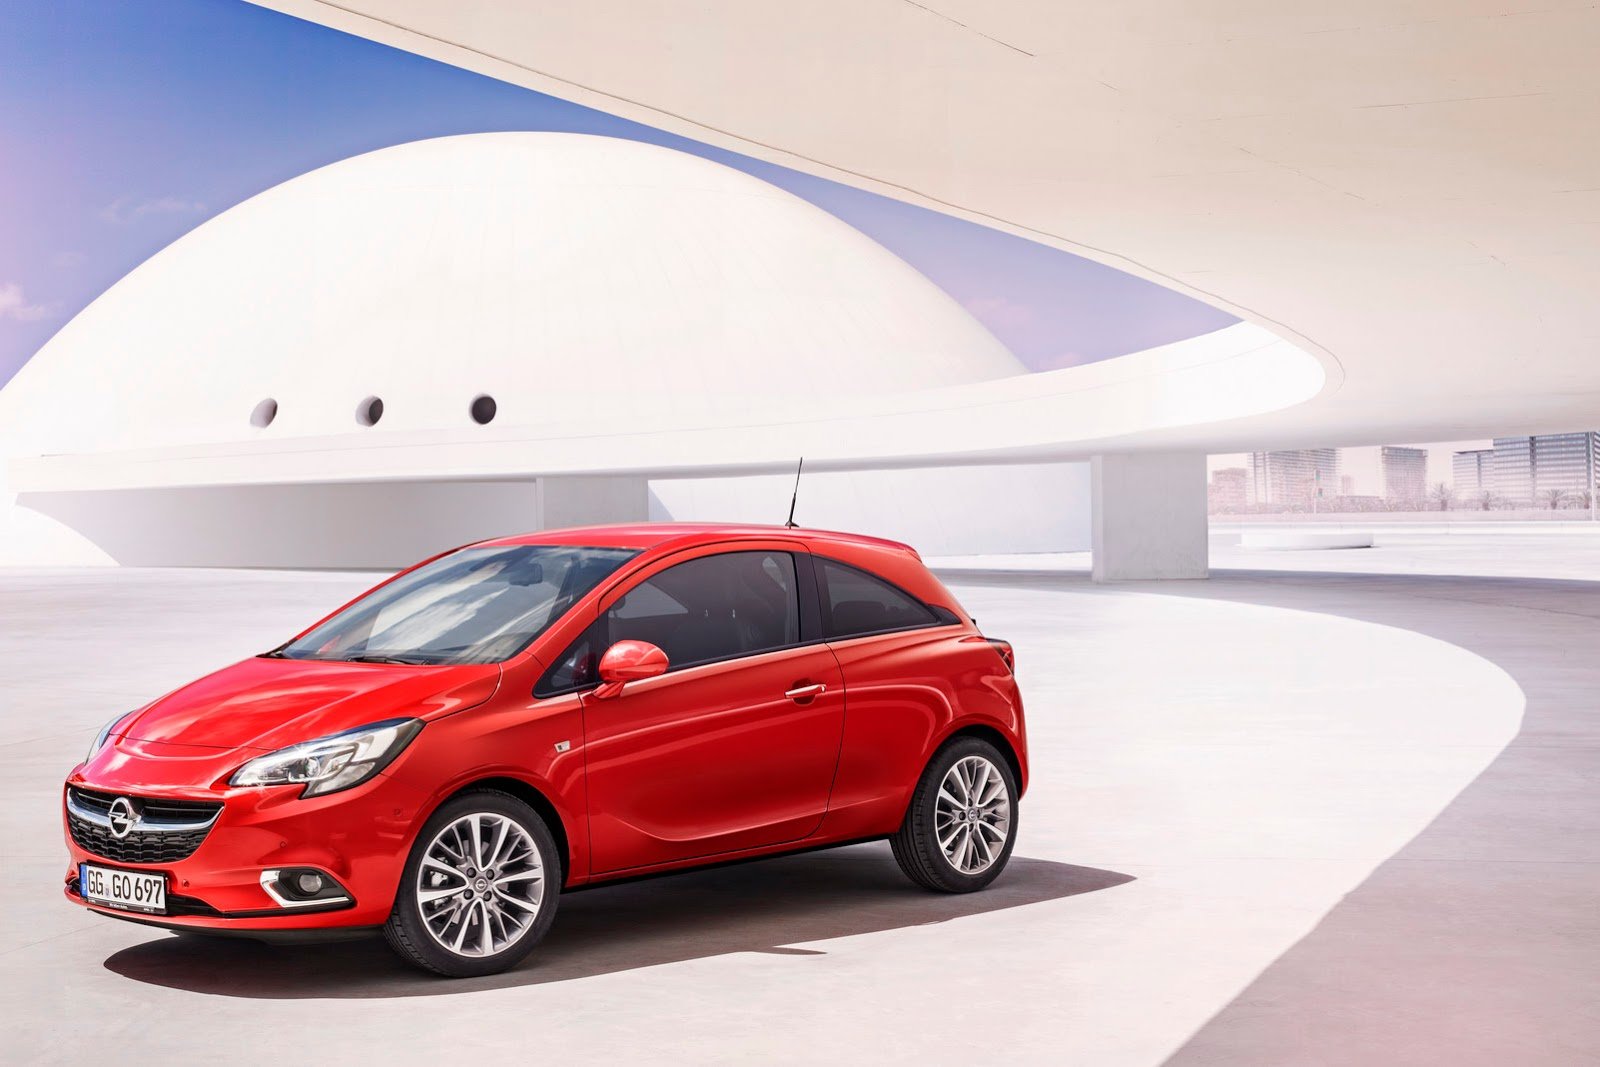 2014, Opel, Corsa, Red, Germany, Cars Wallpaper